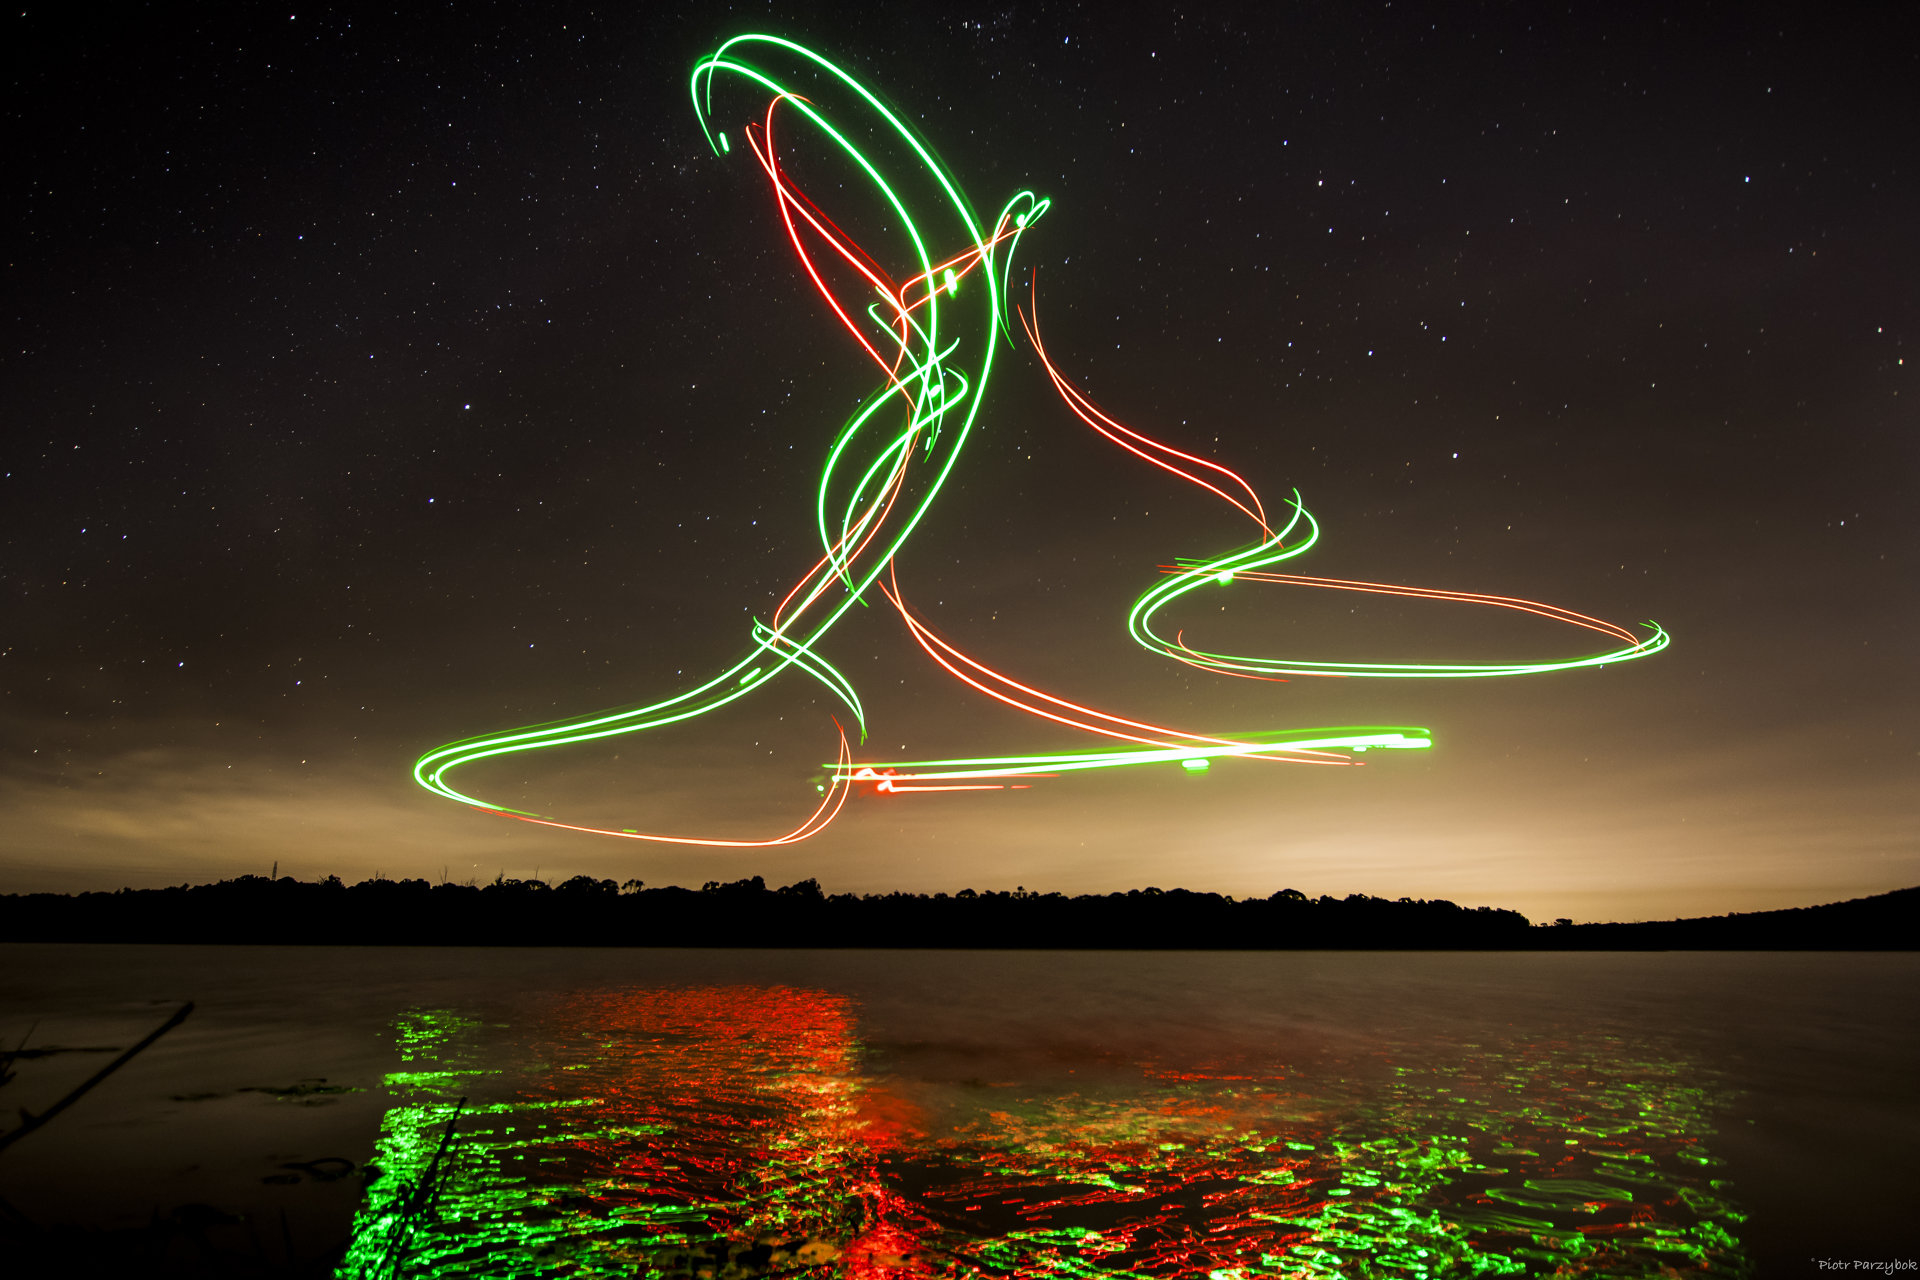 In this alternative approach, Piotr attacked lights to a drone during a long exposure photograph.